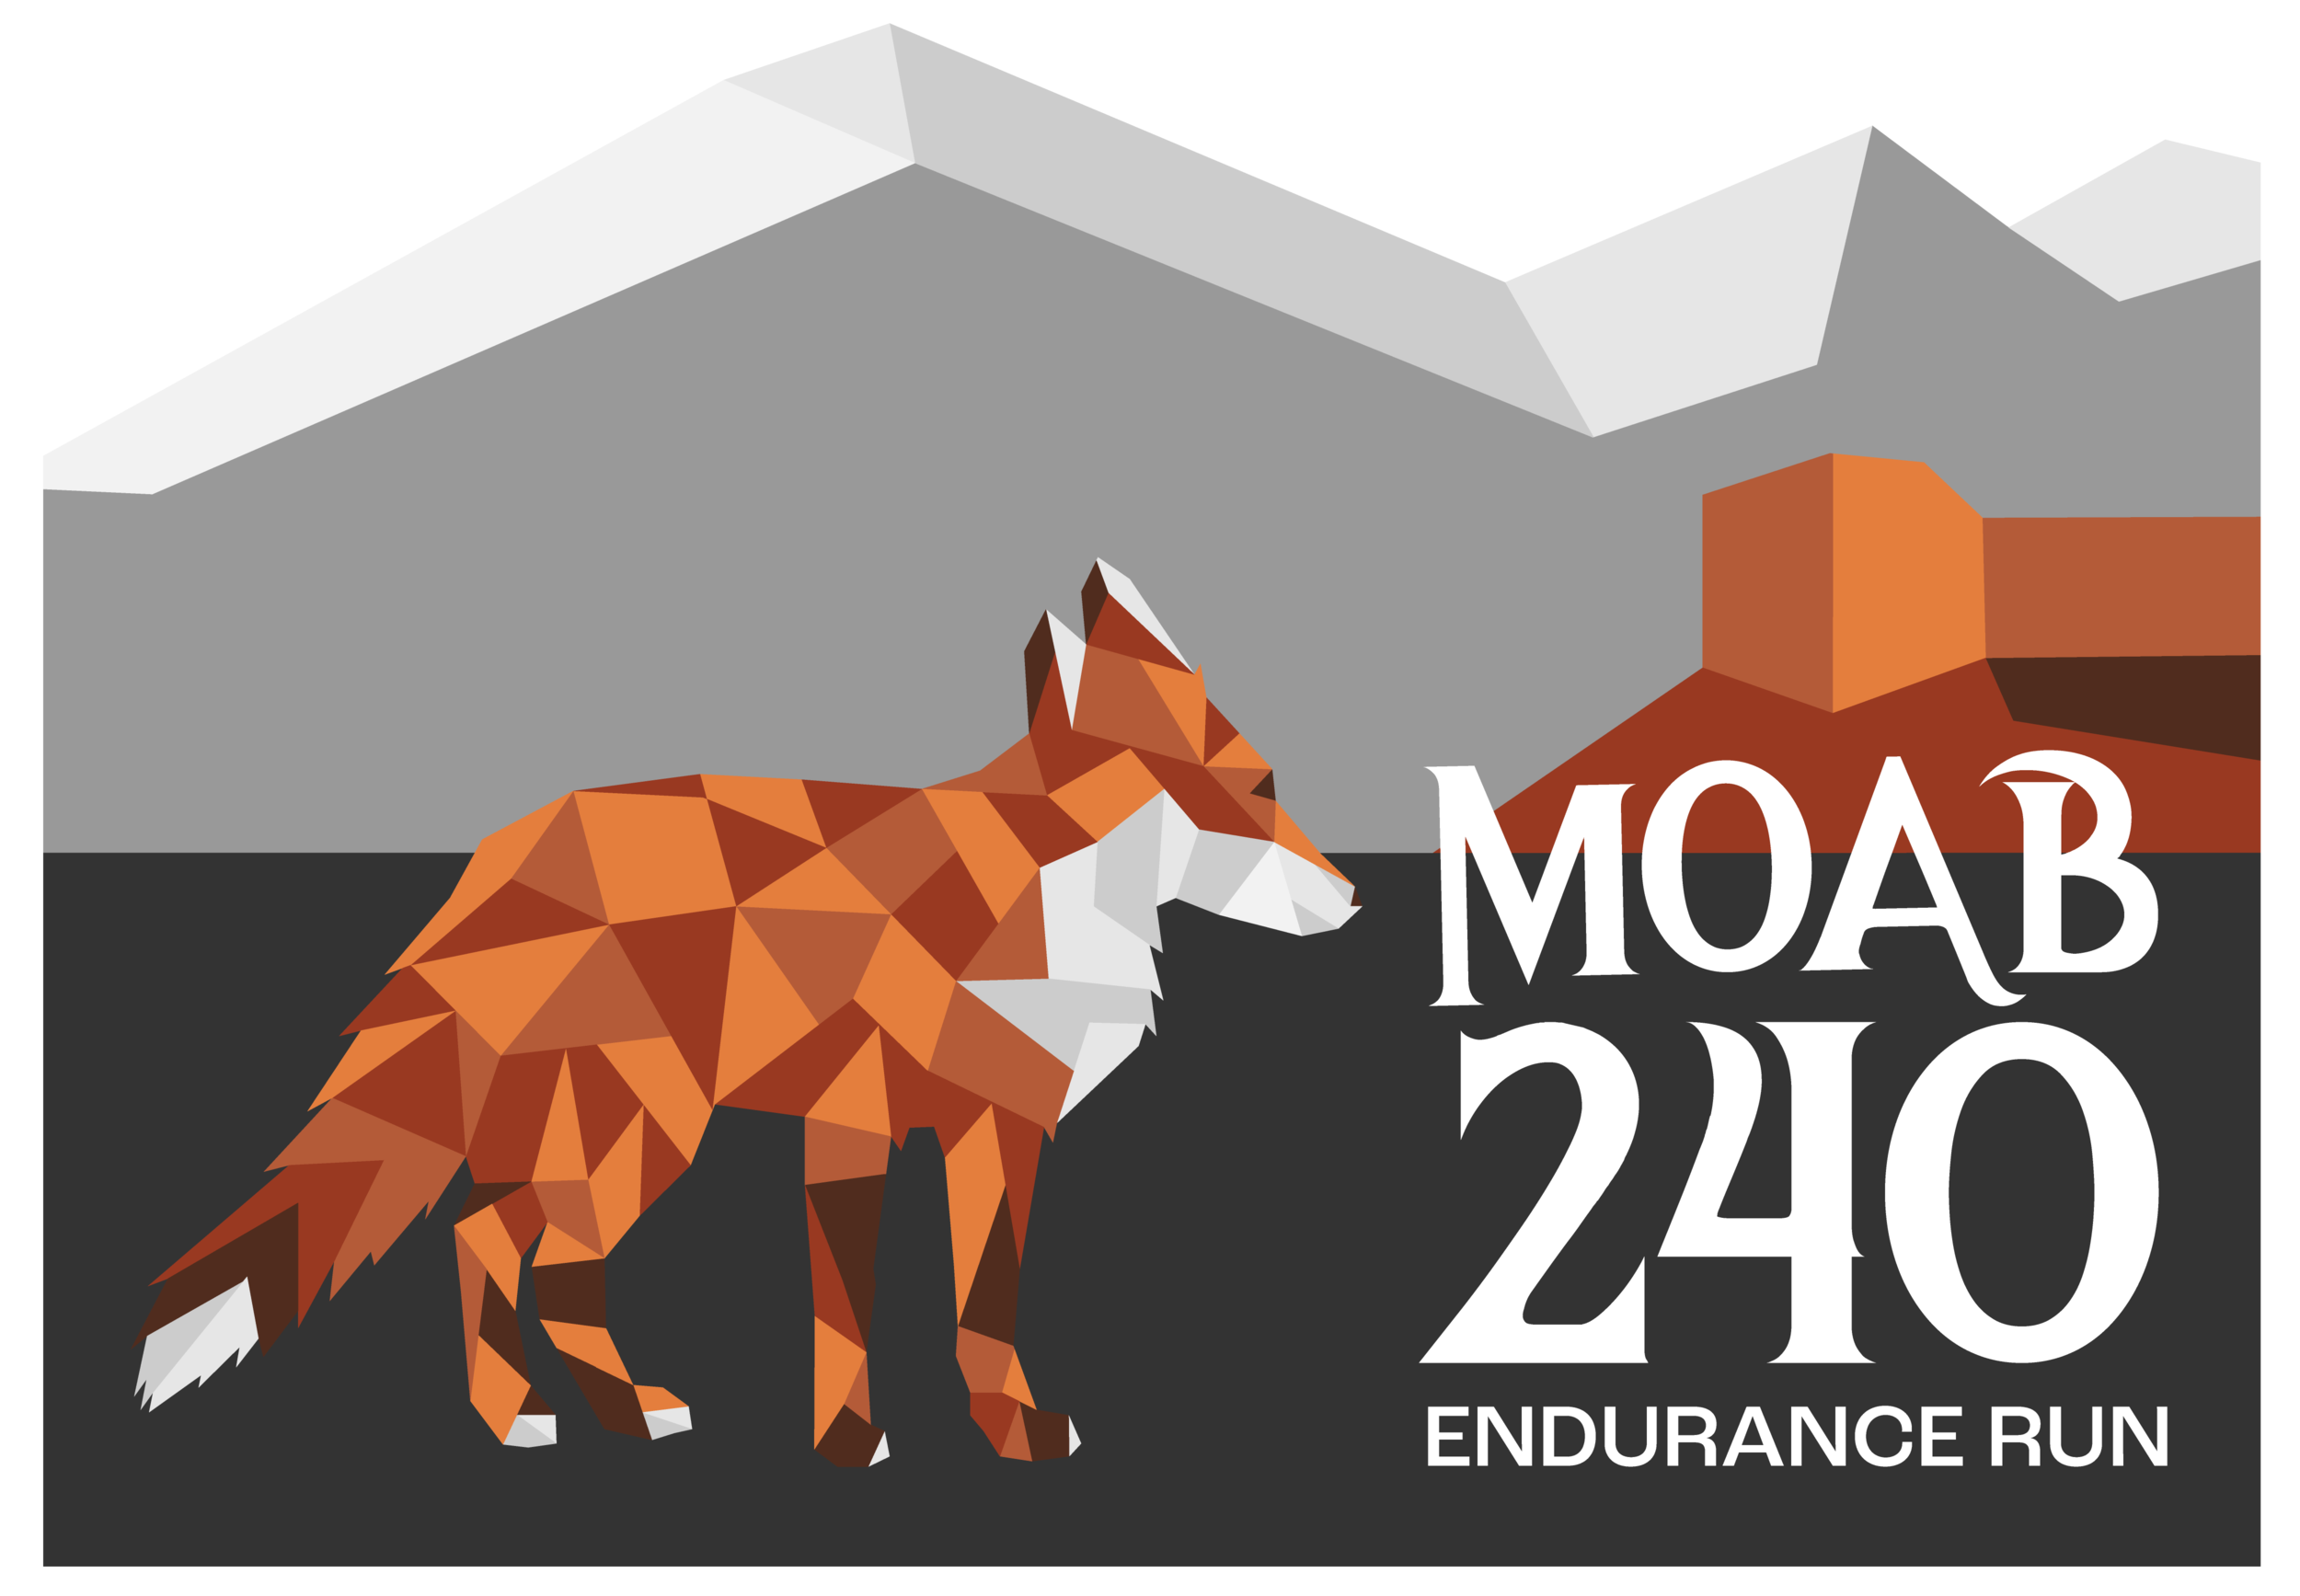 Moab 240 logo with La Sal mountains and a desert fox